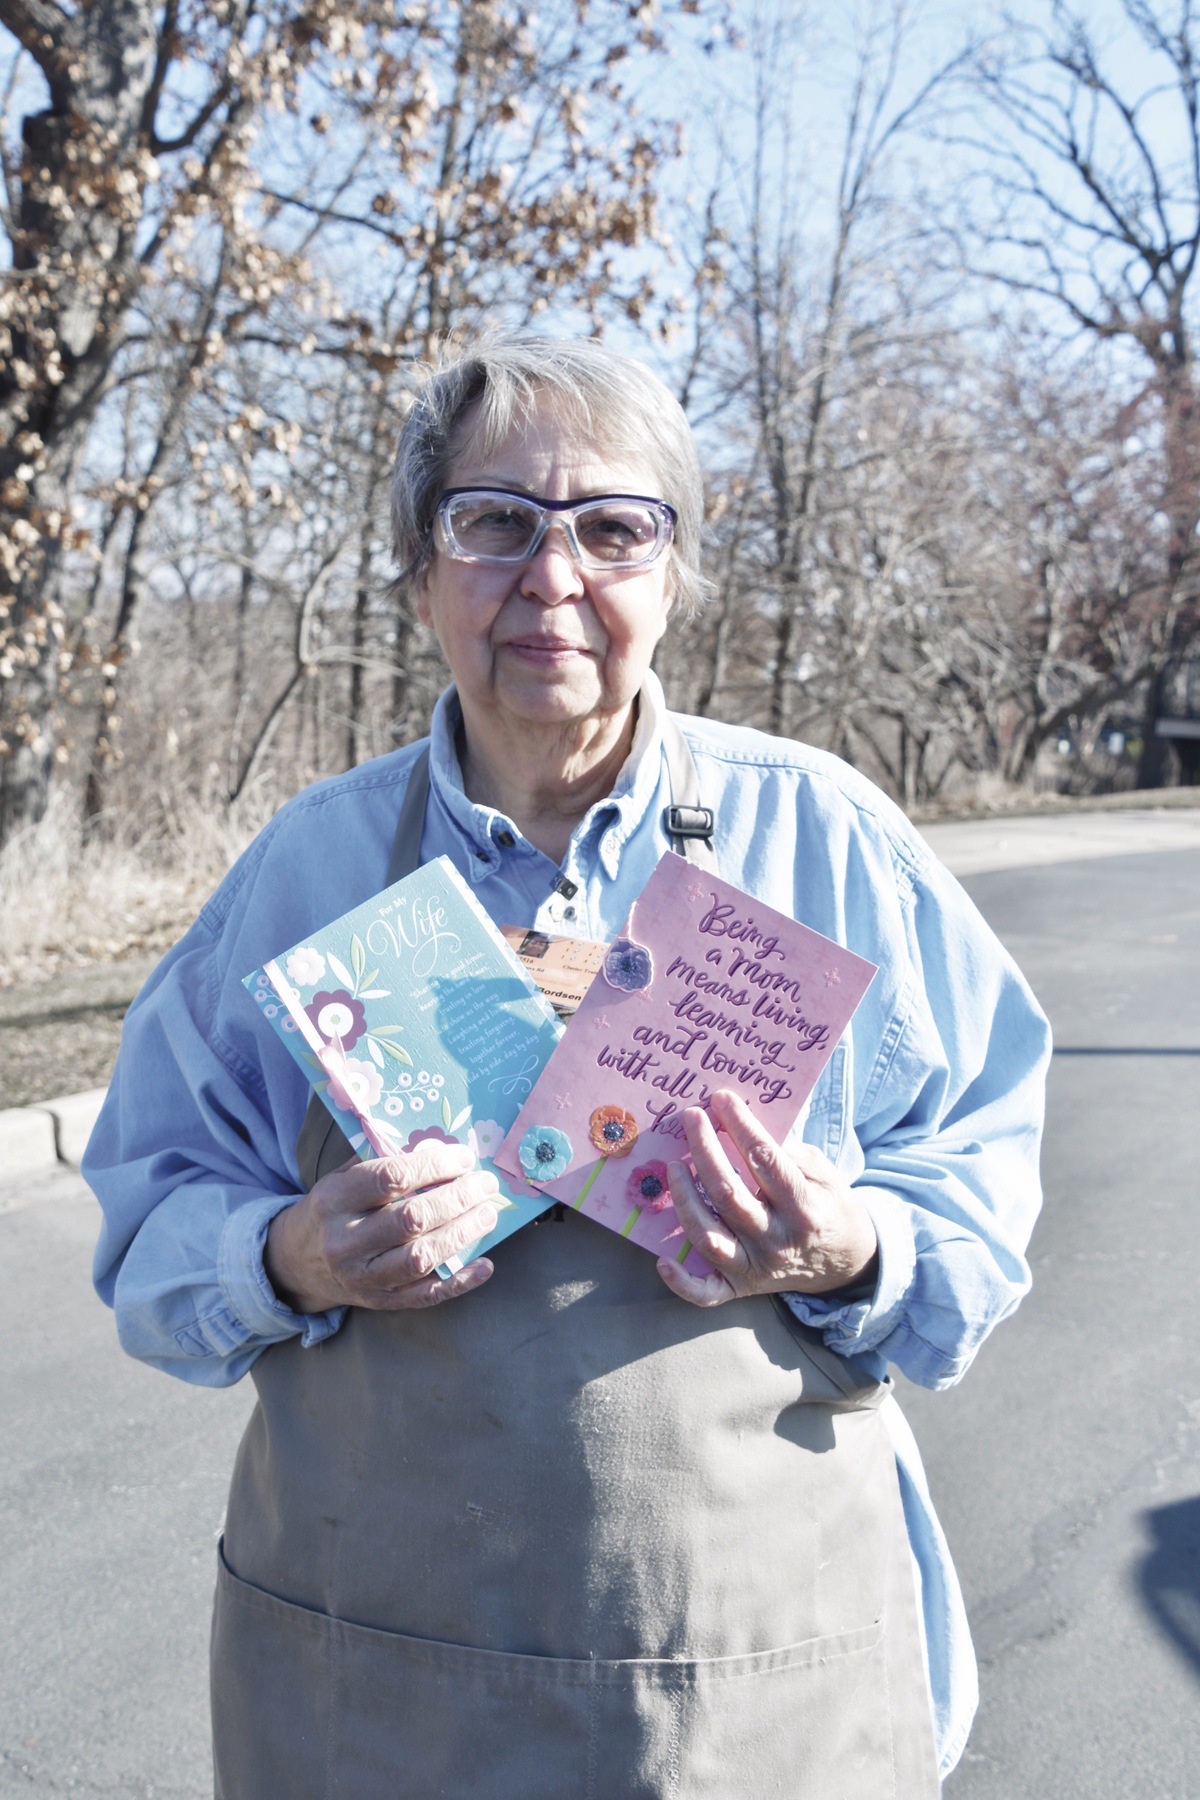 Donna Bordsen uses old greeting cards for craft projects to help developmentally delayed individuals. She is accepting donations of old greeting cards. (Photo by Christine Such/My Sun Day News)